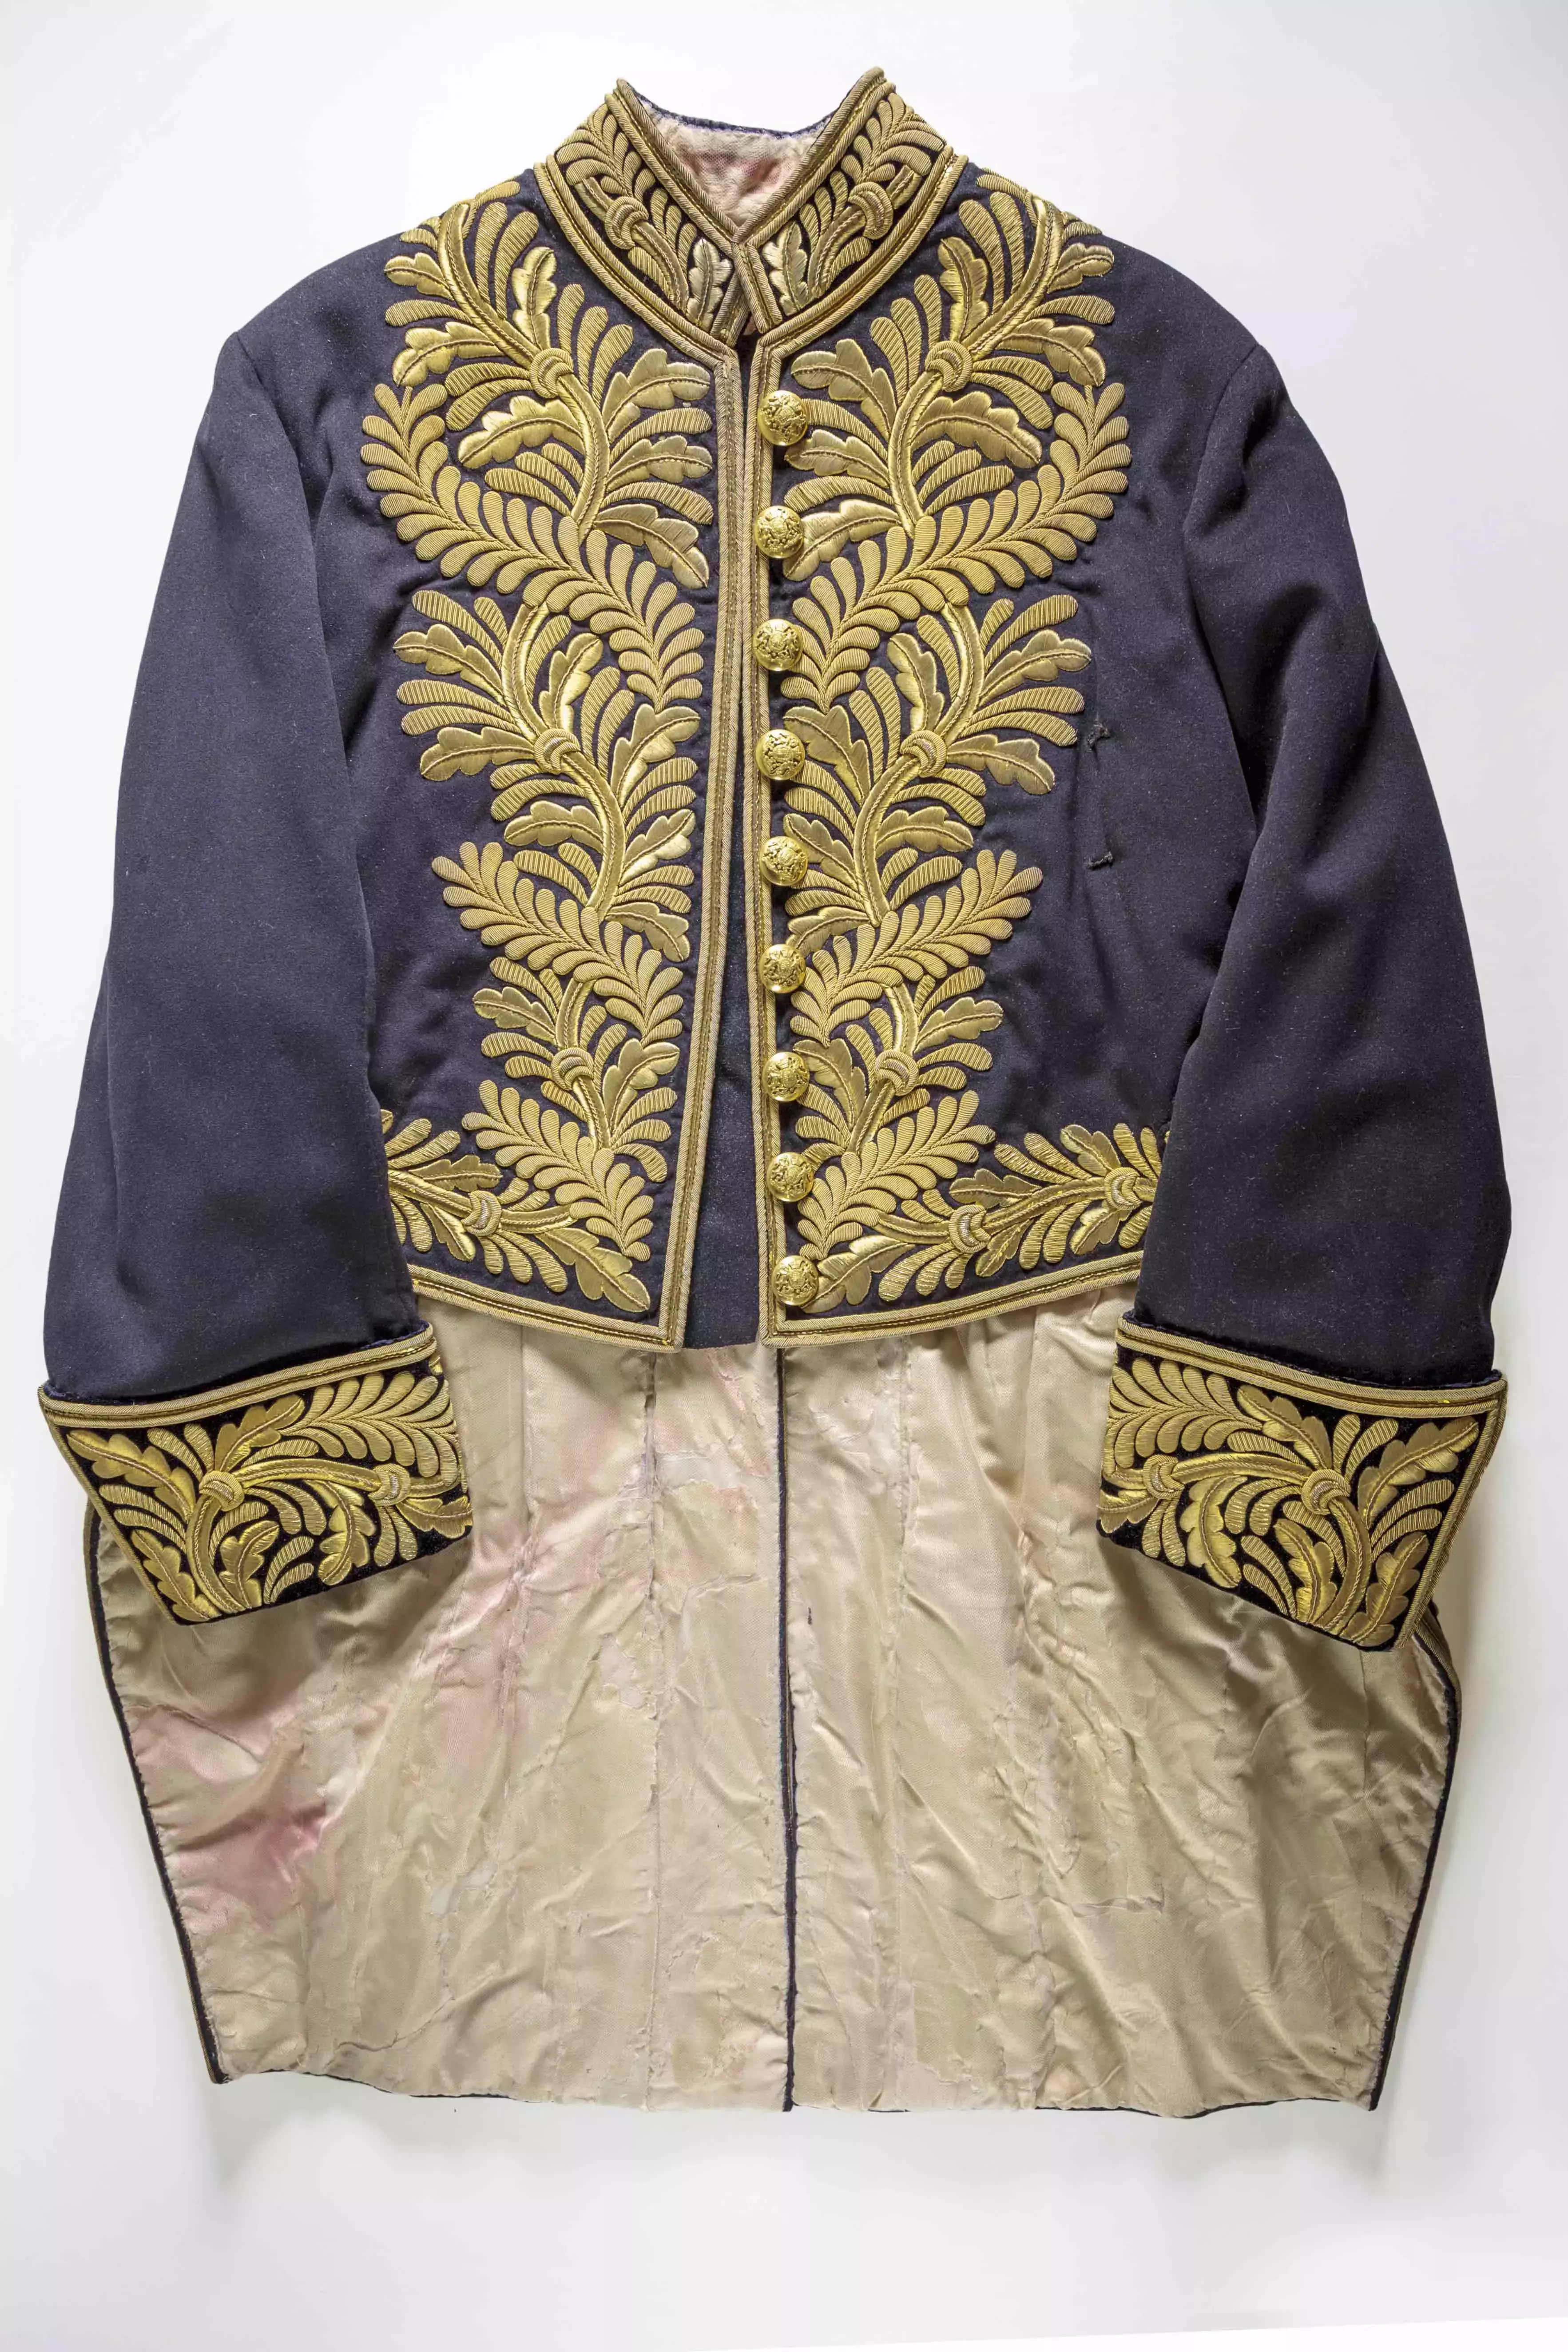 Edmund Barton's coatee with elaborate gold threading and a royal blue material.  